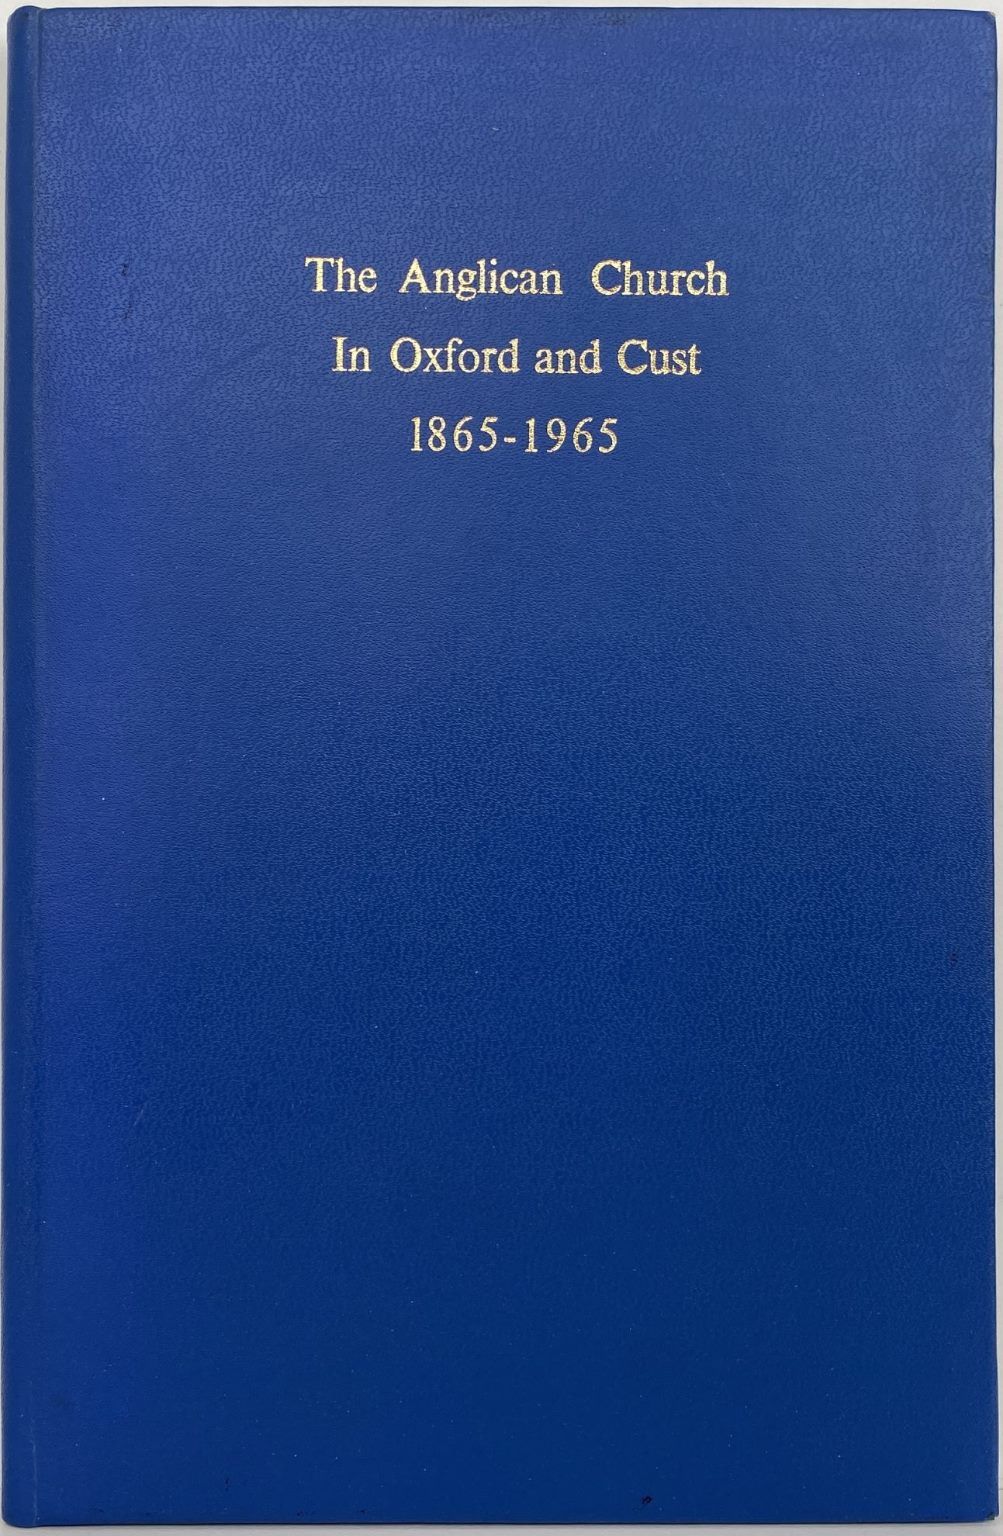 The Anglican Church in Oxford and Cust 1865-1965